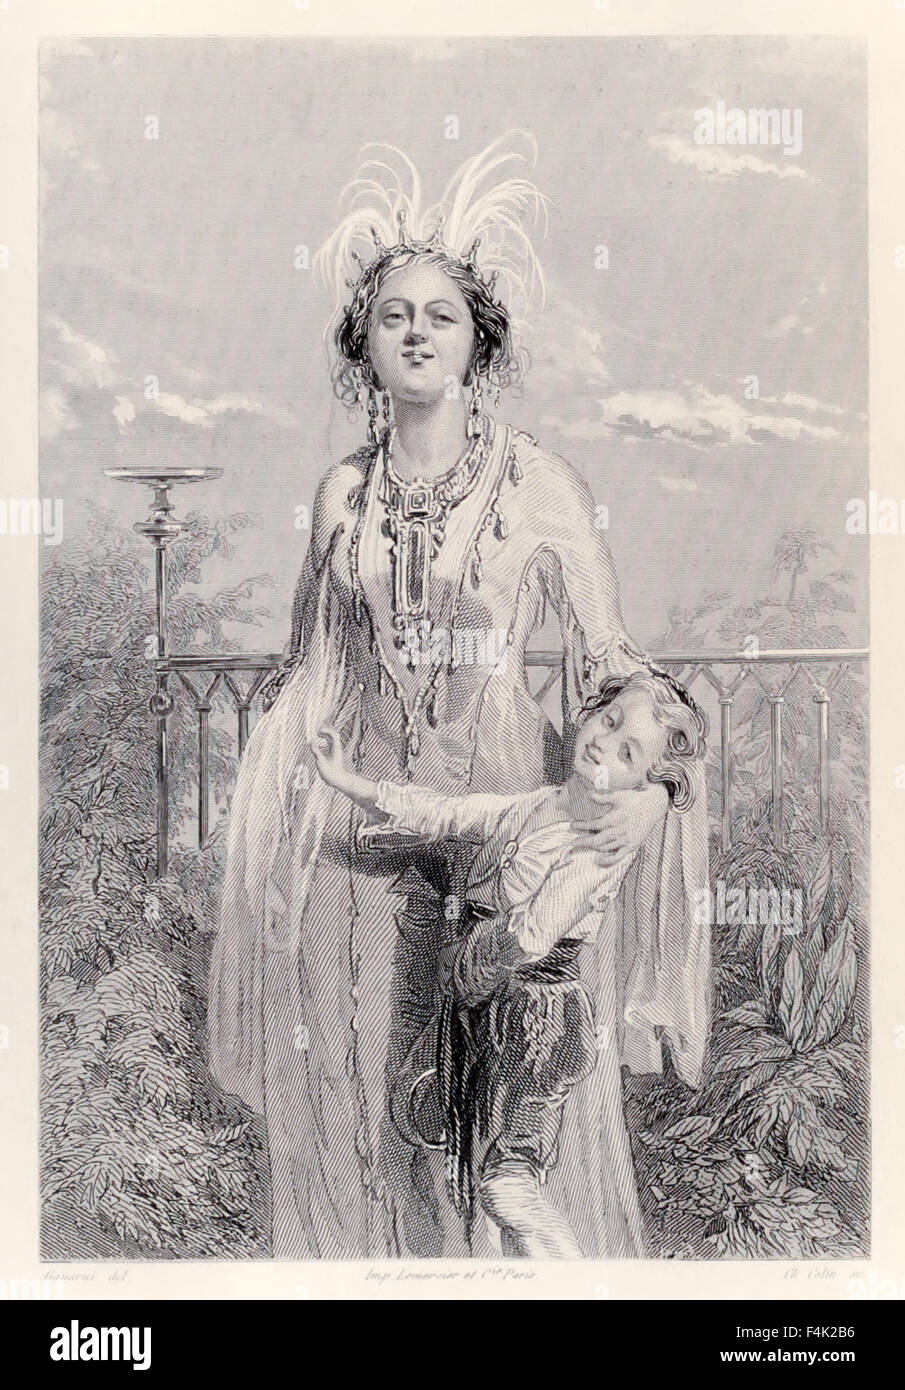 'The Queen of Laputa' from 'Gulliver's Travels' by Jonathan Swift (1667-1745), illustration by Paul Gavarni (1804-1866). See description for more information. Stock Photo